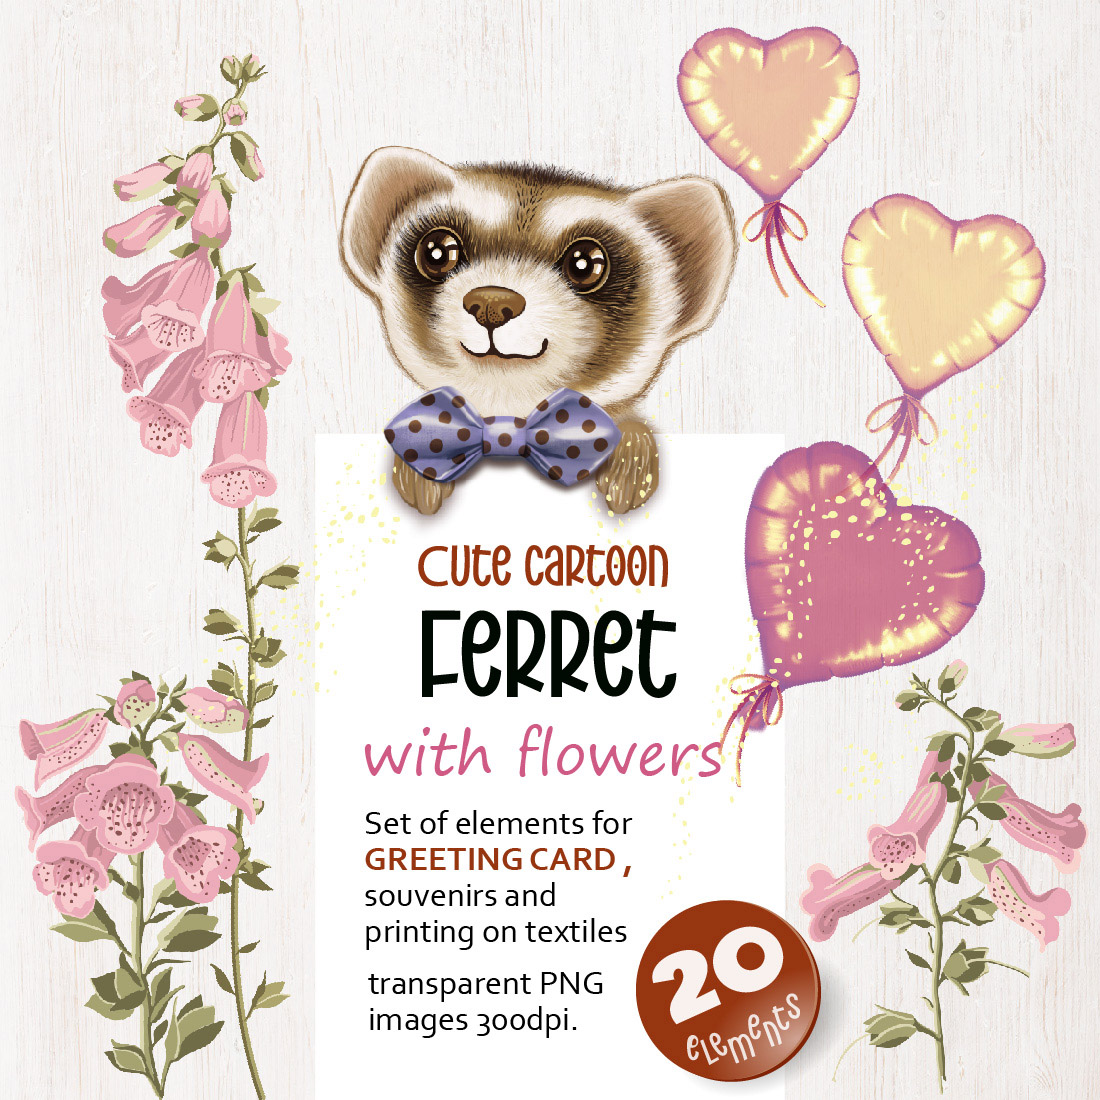 Cute Cartoon Ferret with Flowers cover image.